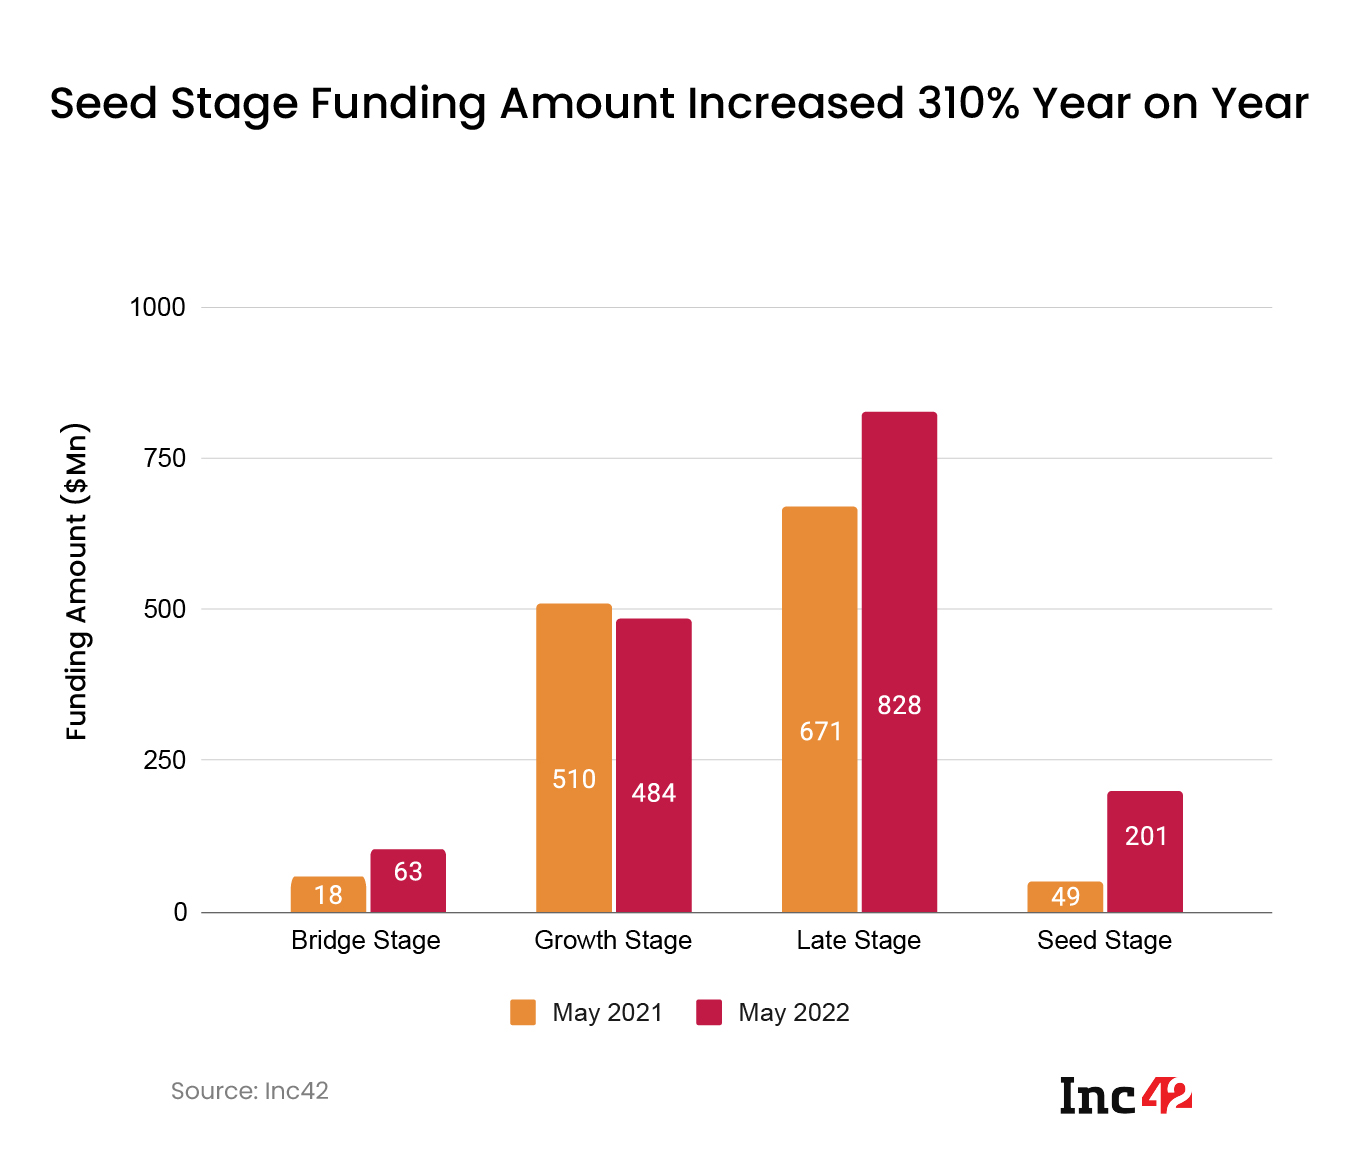 Seed stage funding amount increased 310% in May 2022